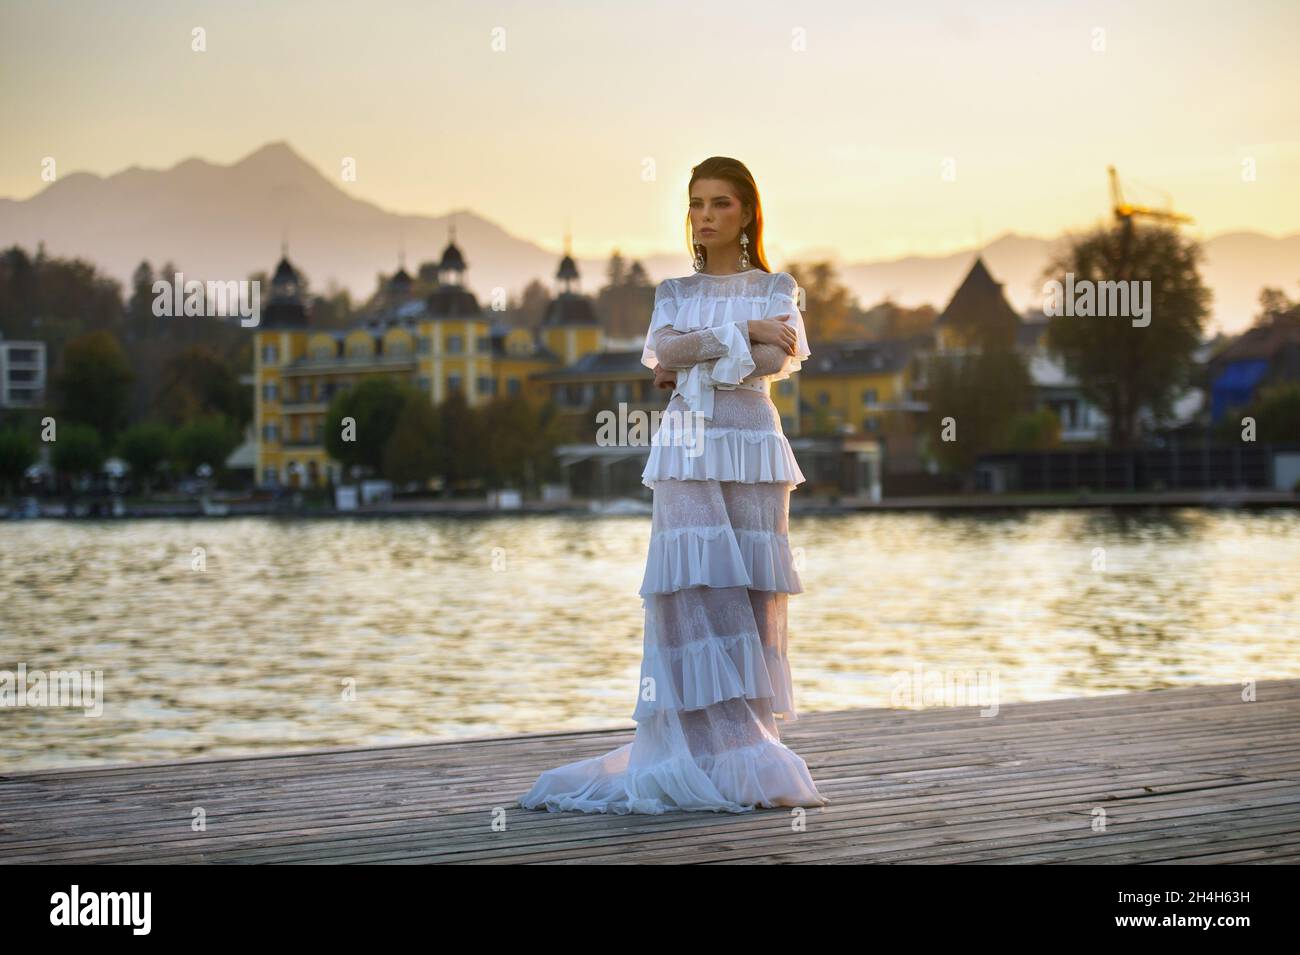 A bride in a white wedding dress in the old town of Austria at sunset. Stock Photo